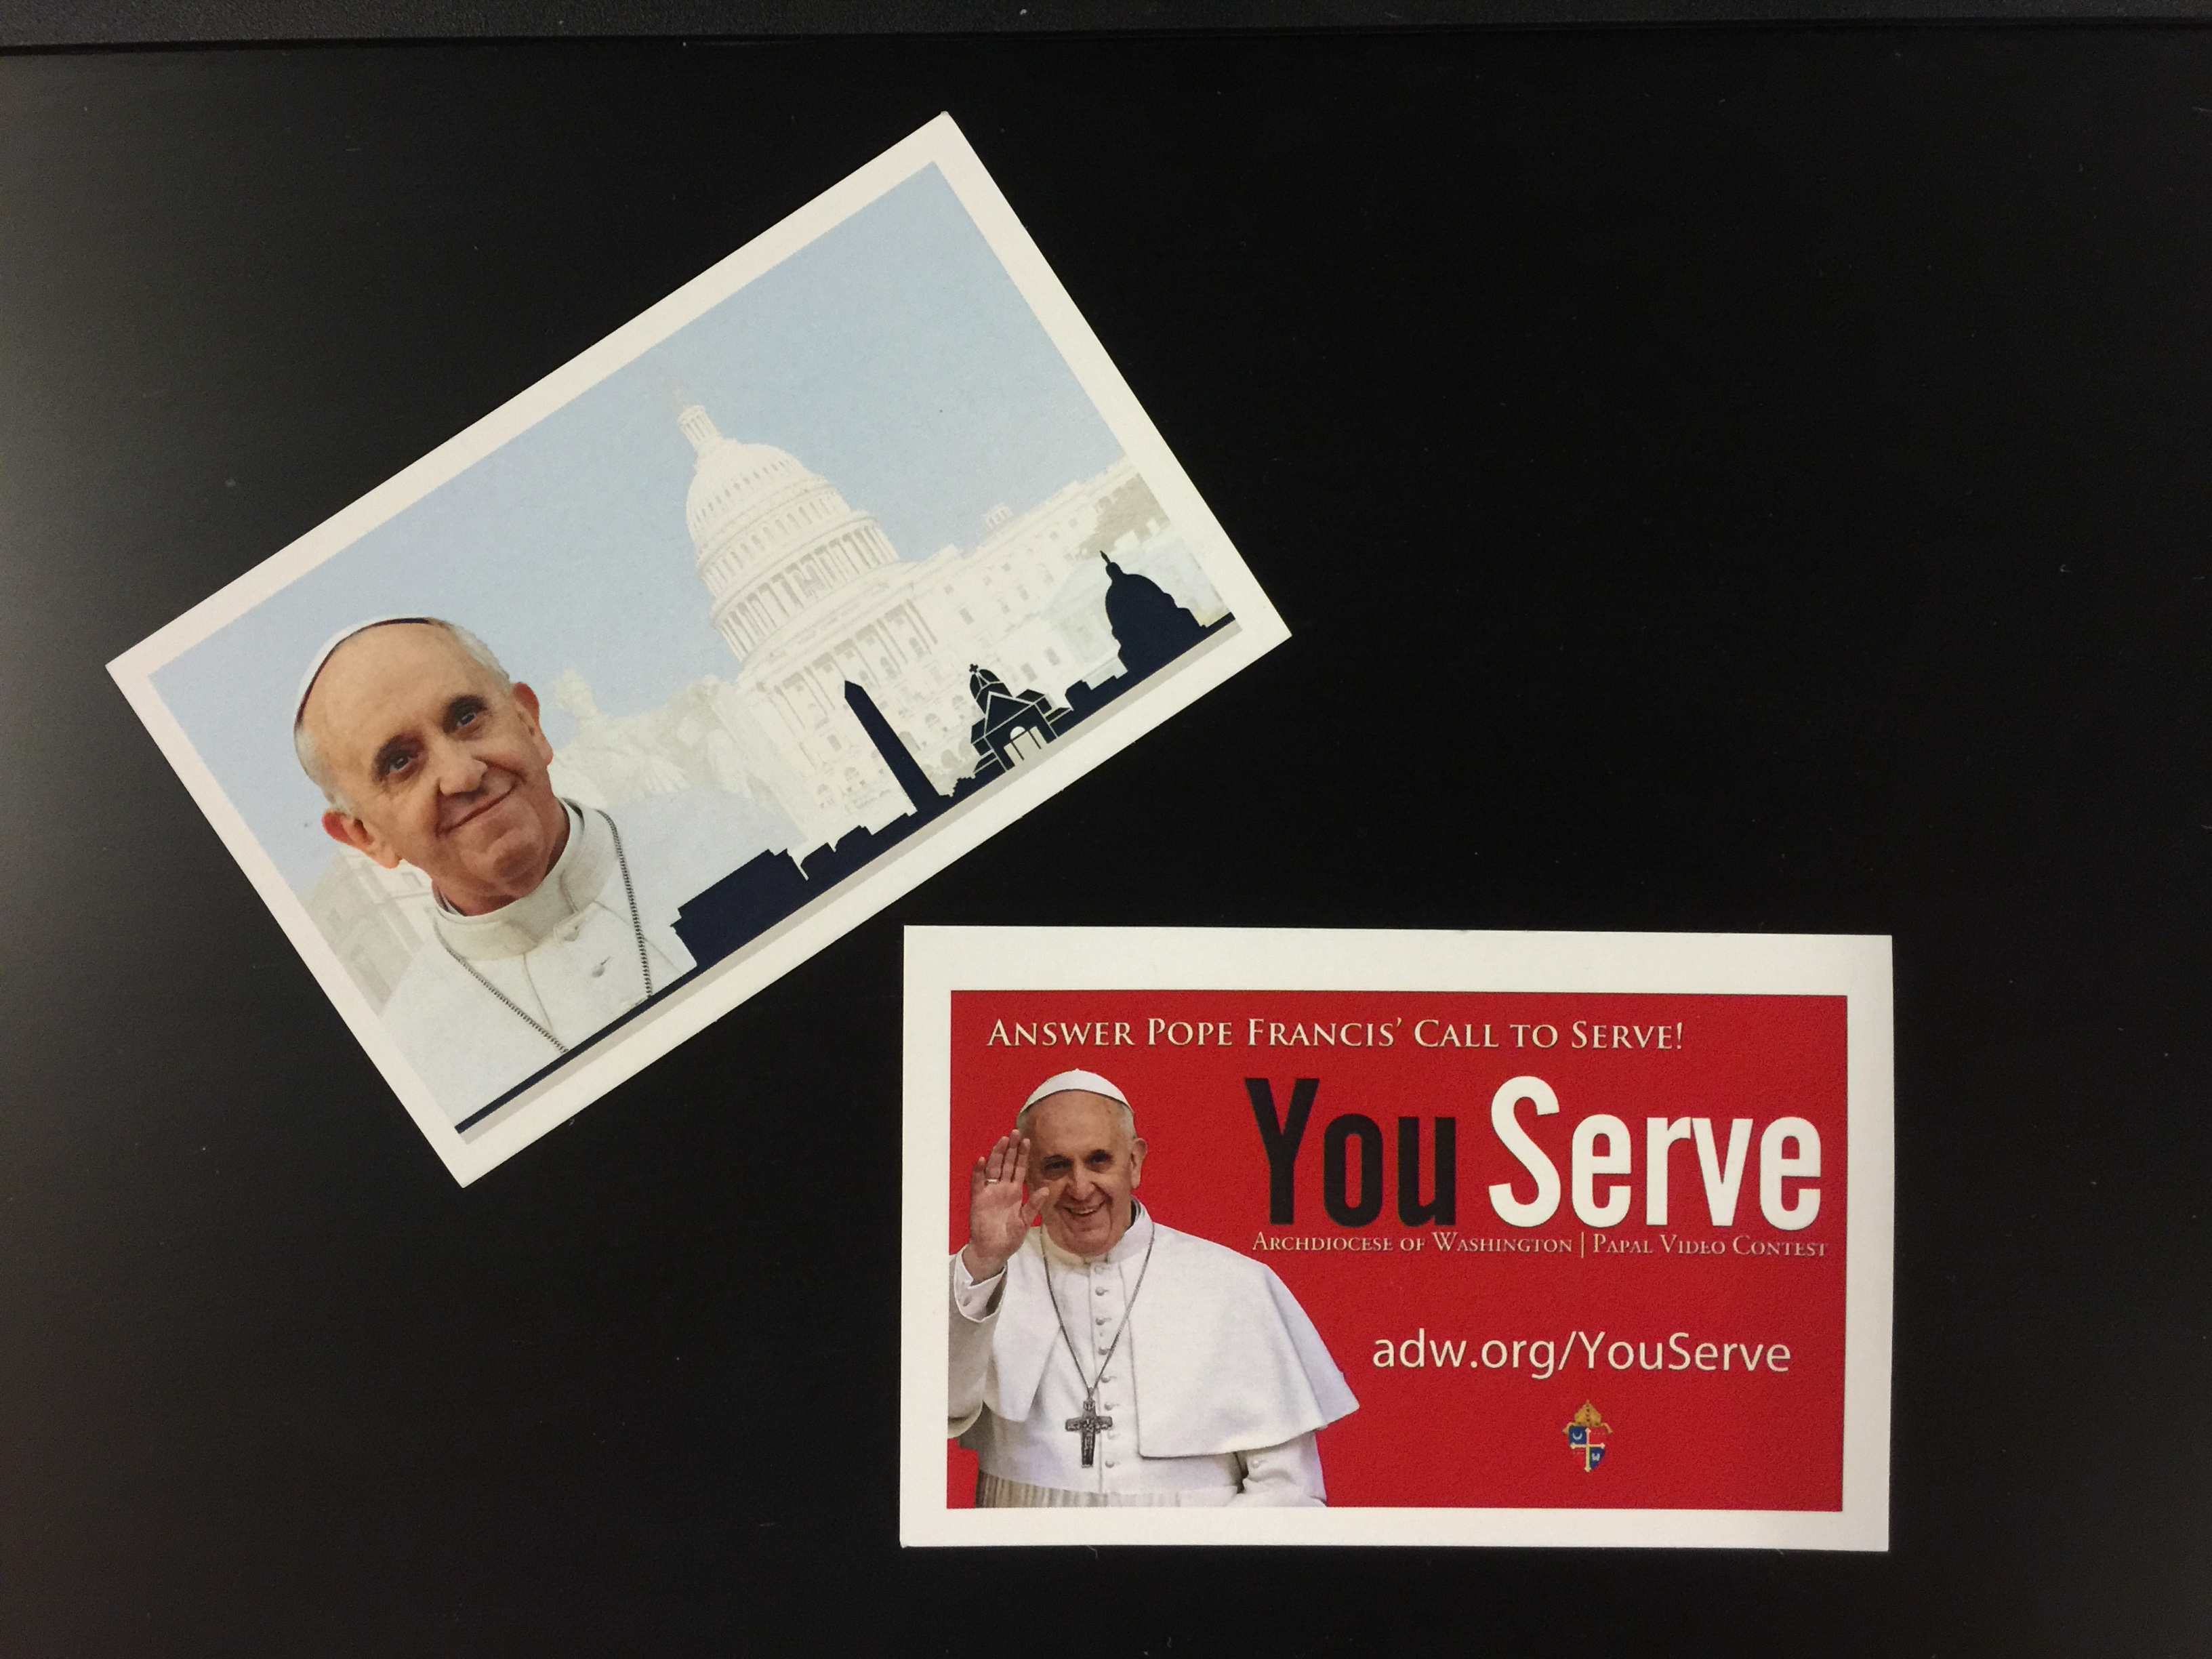 Papal mass tickets the prize in archdiocese video contest